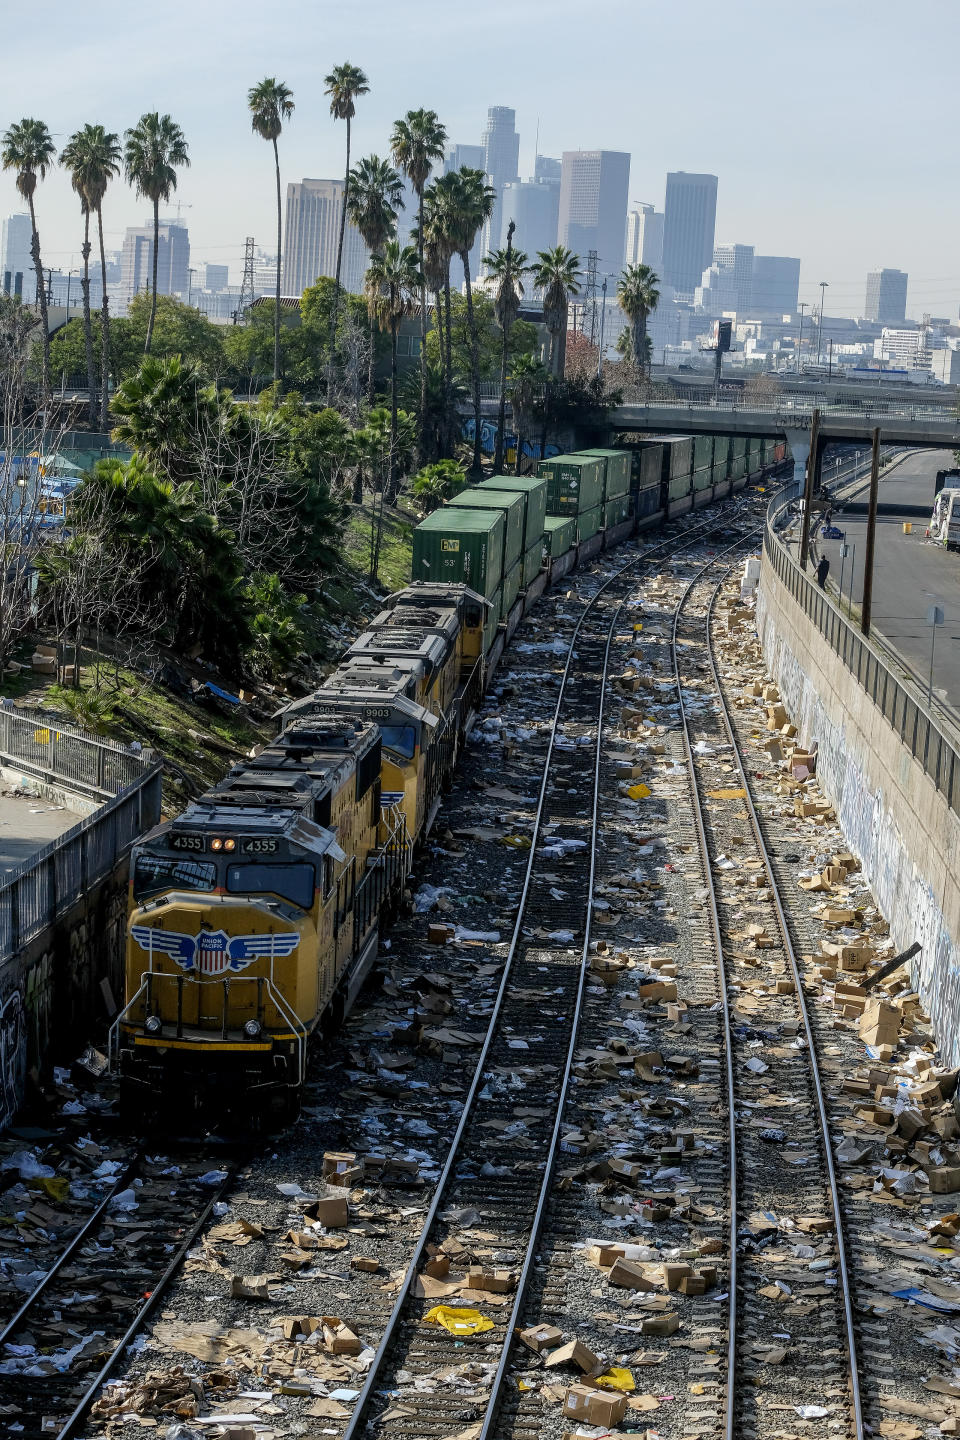 A train passes by as shredded boxes and packages at a section of the Union Pacific train tracks in downtown Los Angeles Friday, Jan. 14, 2022. Thieves have been raiding cargo containers aboard trains nearing downtown Los Angeles for months, leaving the tracks blanketed with discarded packages. The sea of debris left behind included items that the thieves apparently didn't think were valuable enough to take, CBSLA reported Thursday. (AP Photo/Ringo H.W. Chiu)